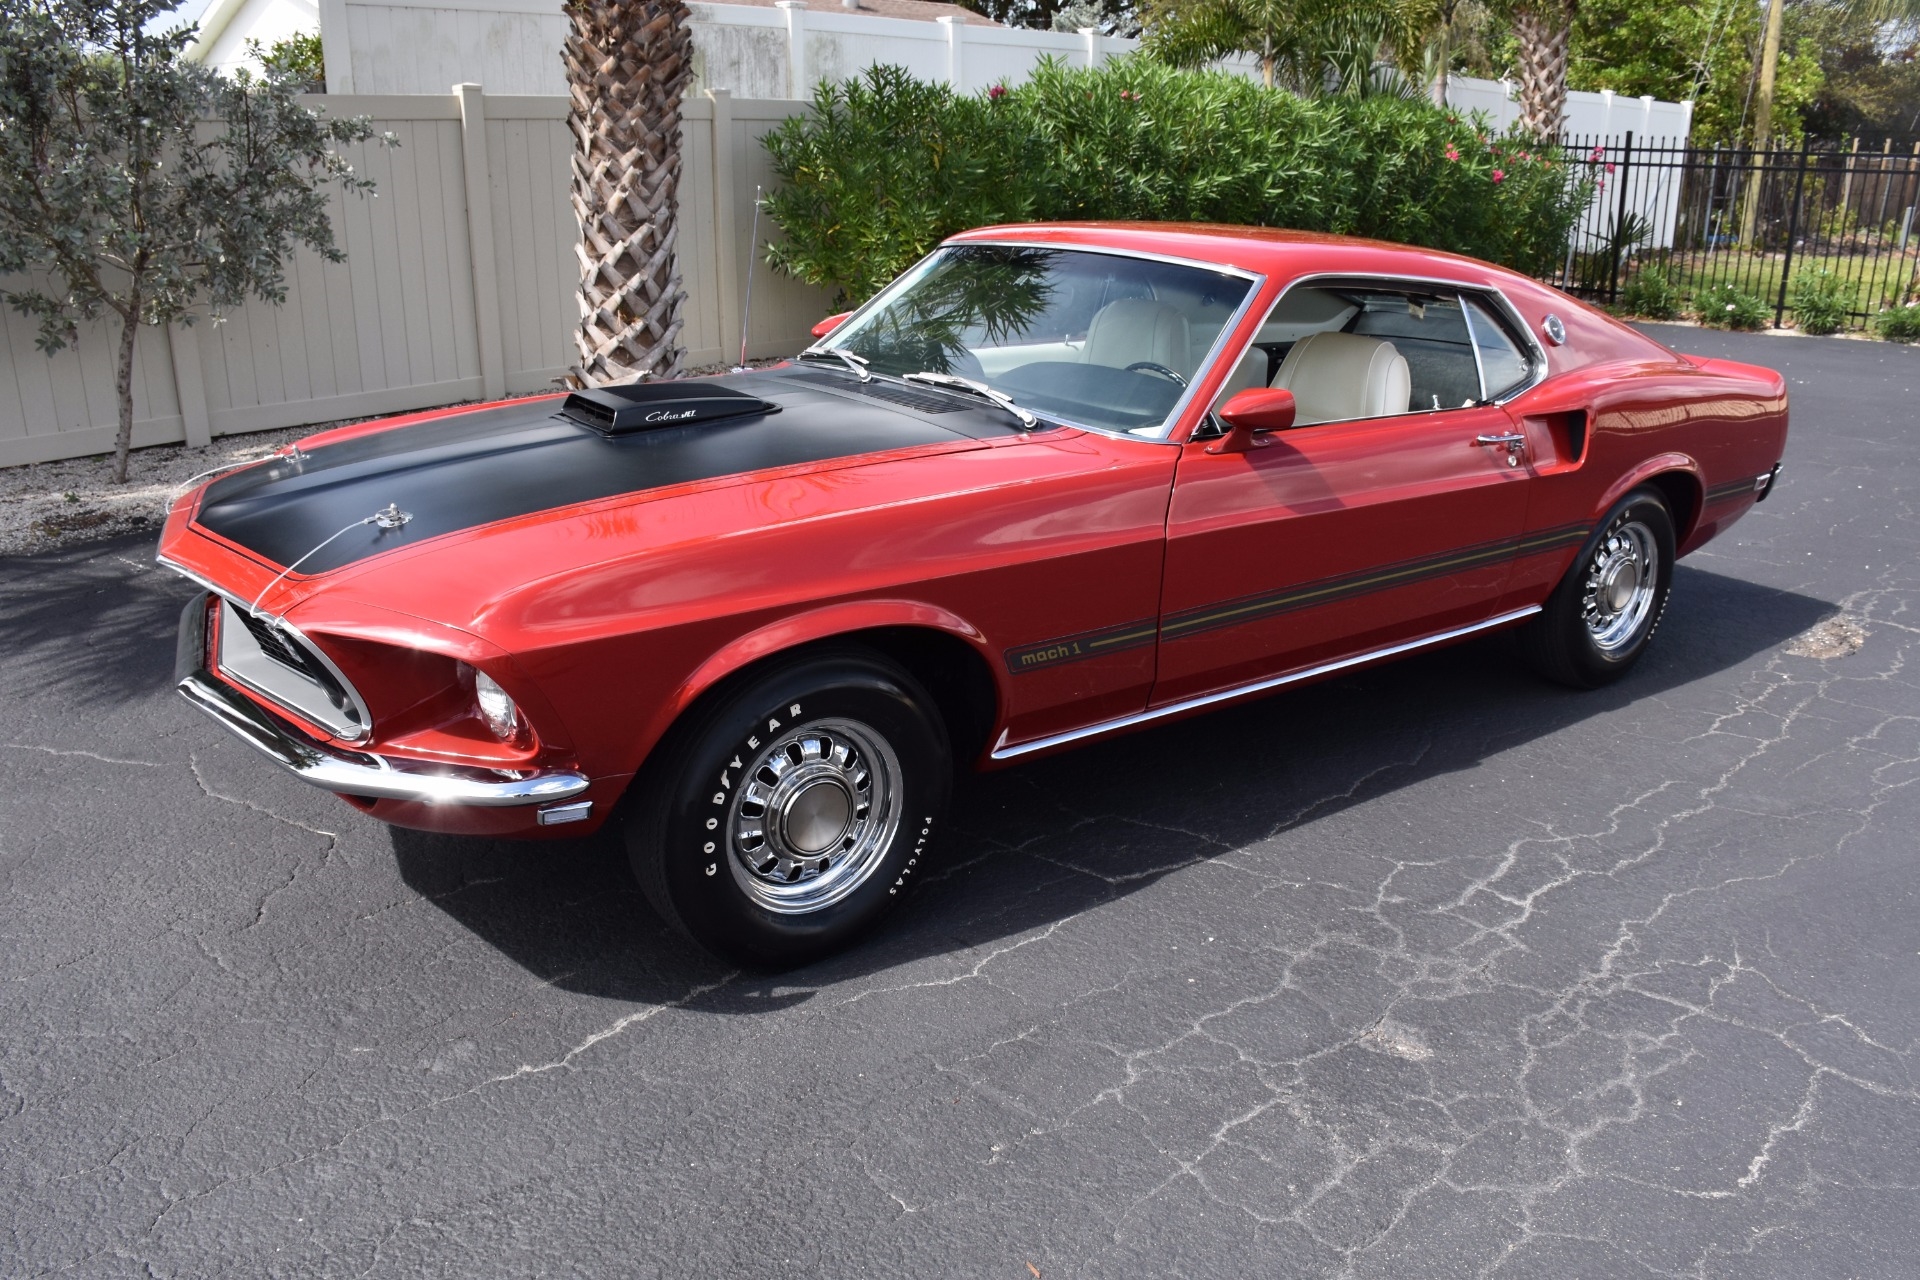 1969 Ford Mustang Mach 1 - 428 Cobra Jet 0 Candy Apple Red Coupe 428C.I ...